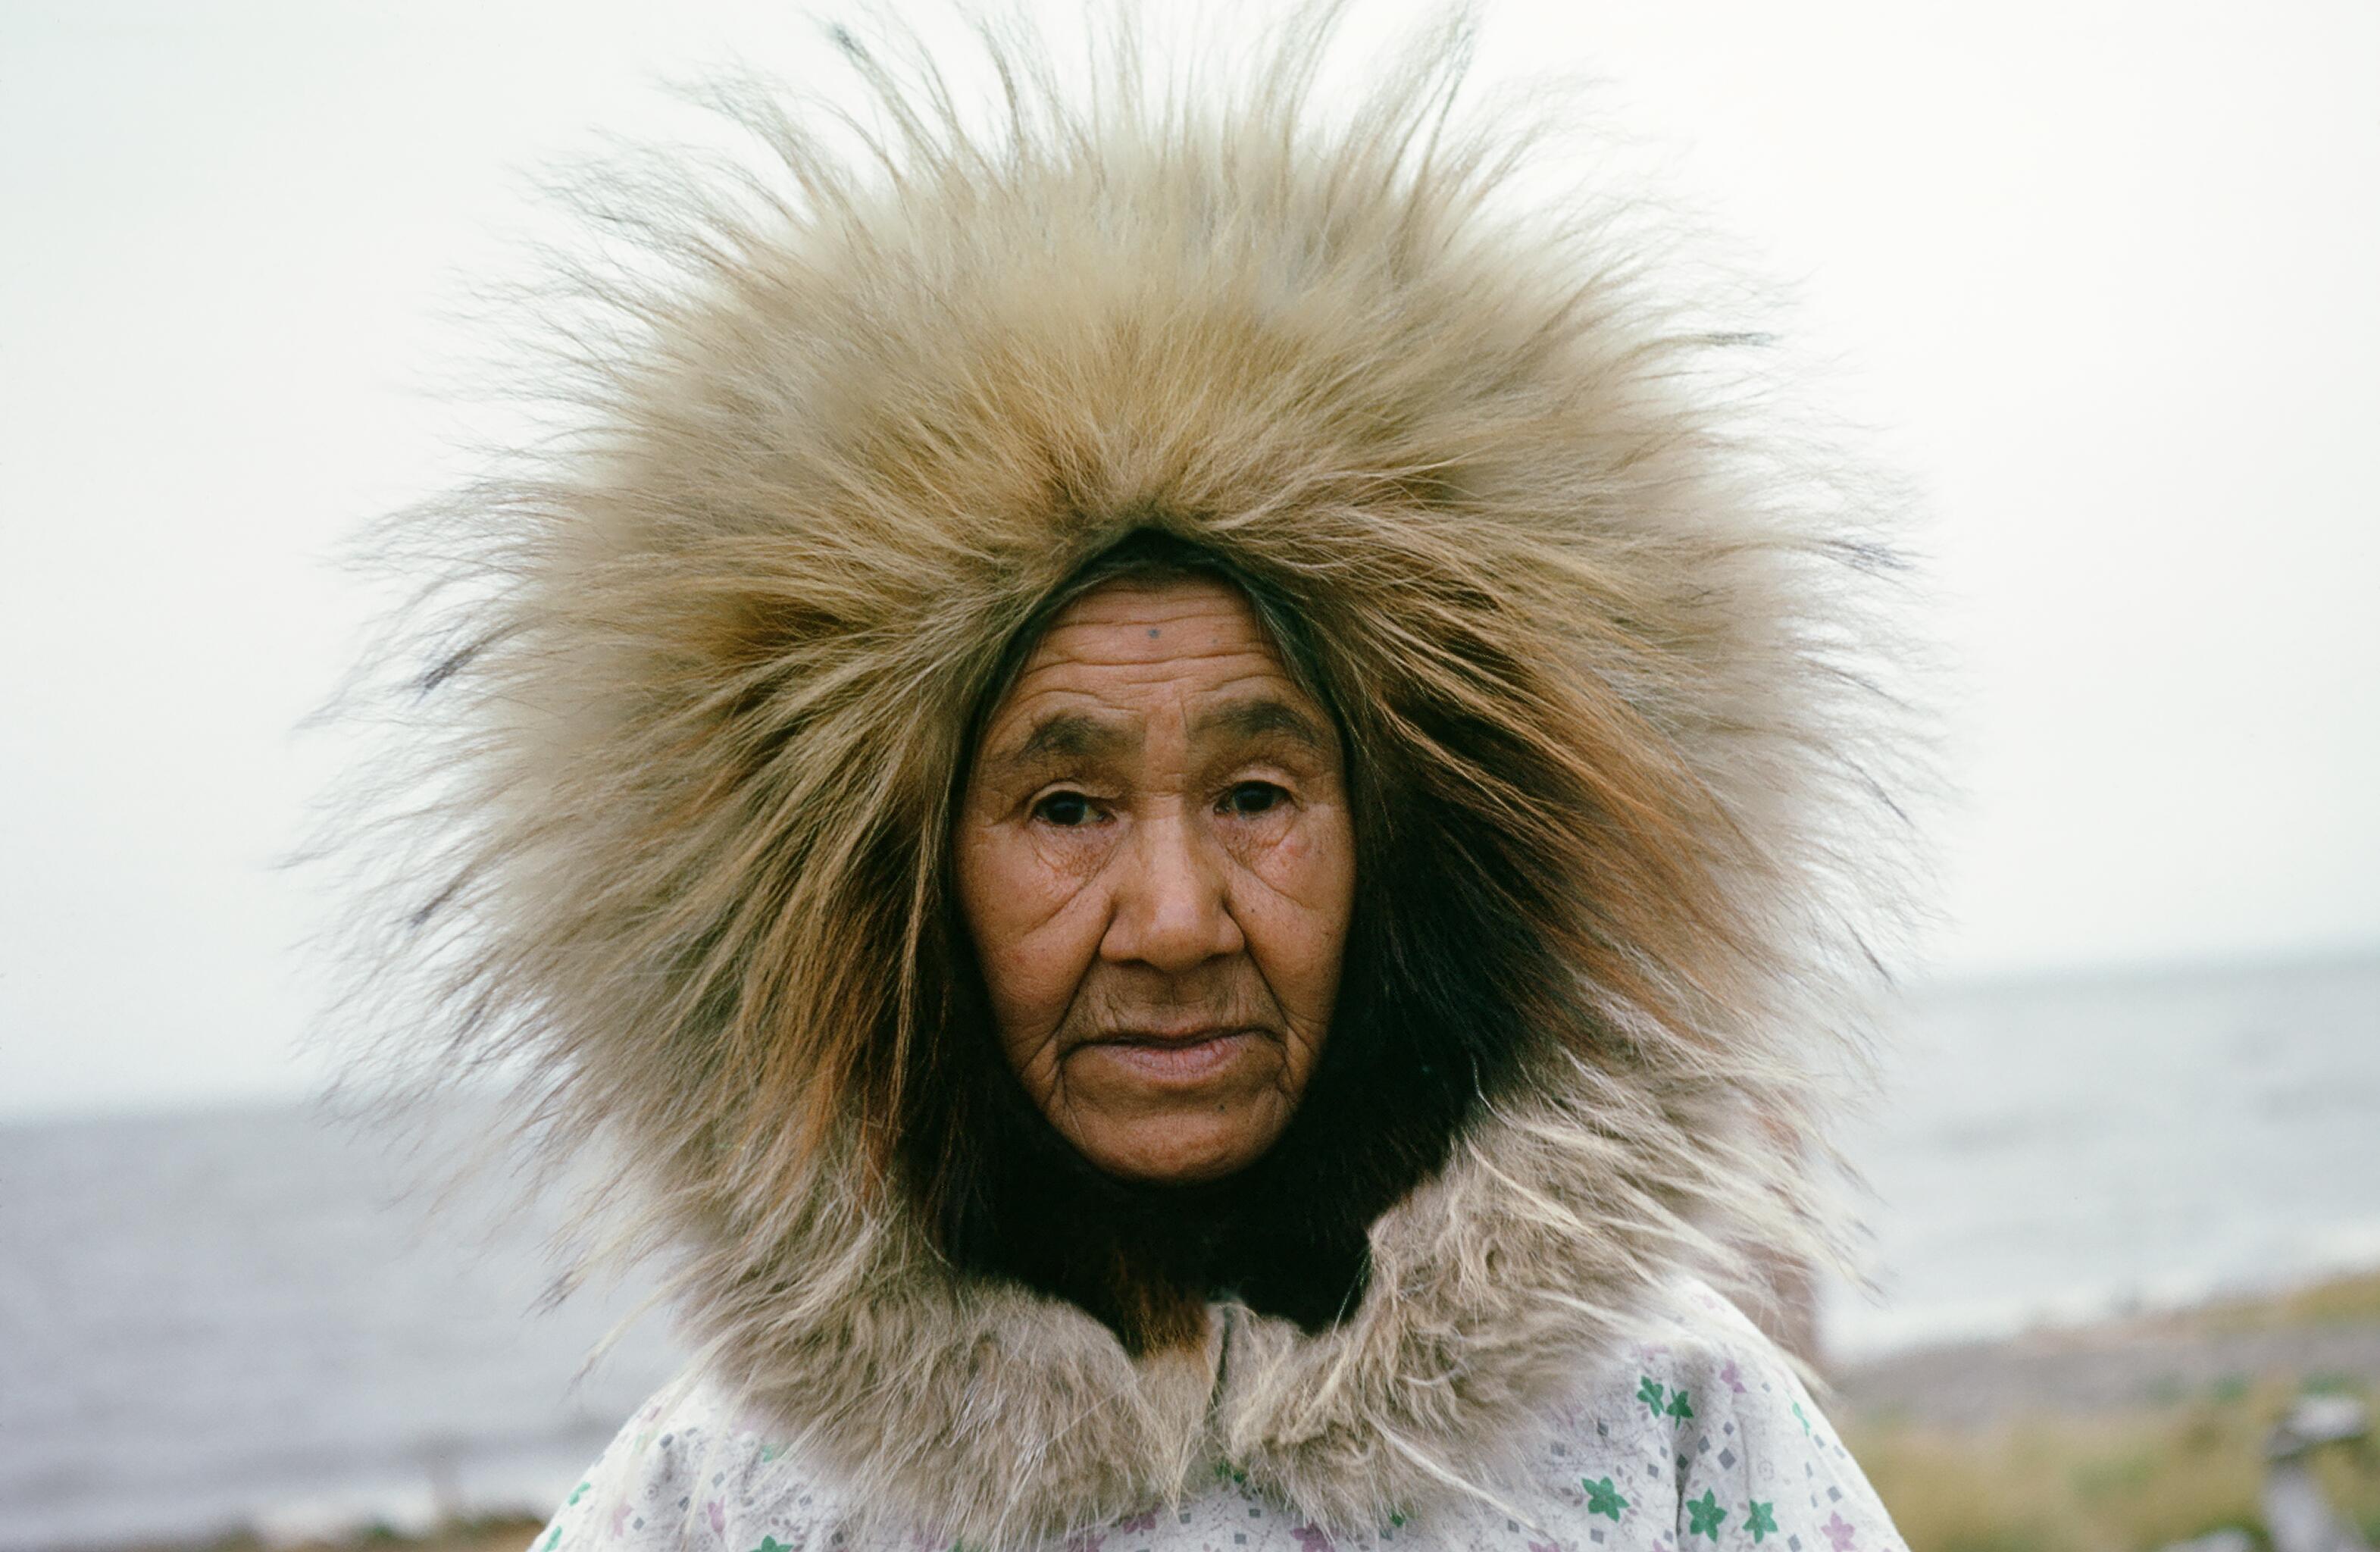 This oldest Eskimo woman had many stories to tell